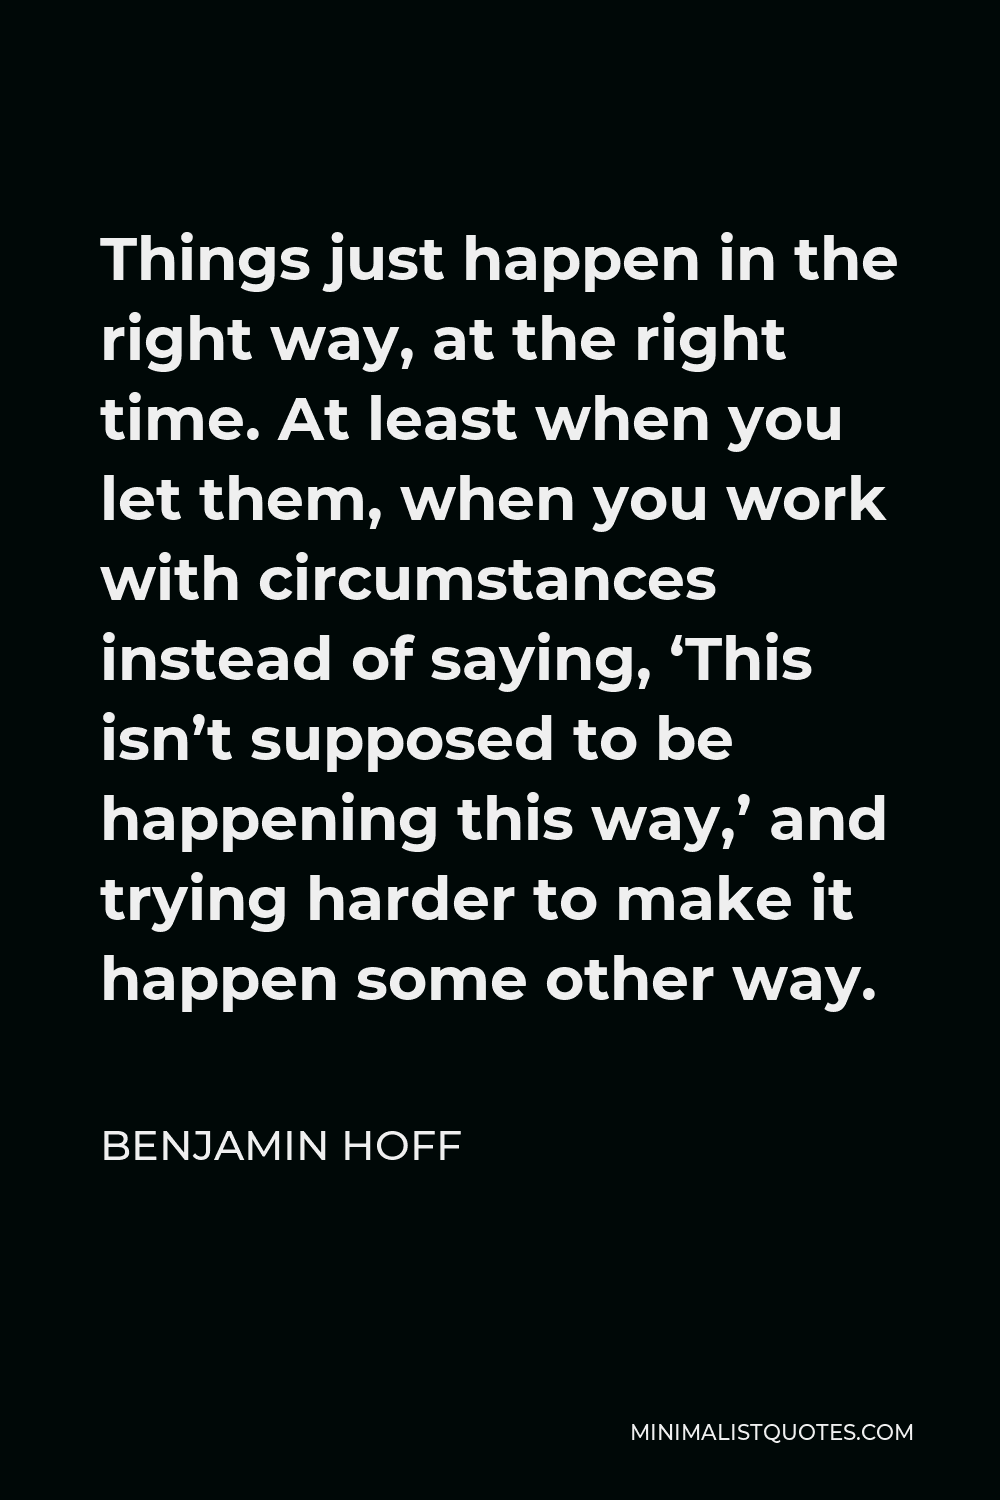 Benjamin Hoff Quote - Things just happen in the right way, at the right time. At least when you let them, when you work with circumstances instead of saying, ‘This isn’t supposed to be happening this way,’ and trying harder to make it happen some other way.